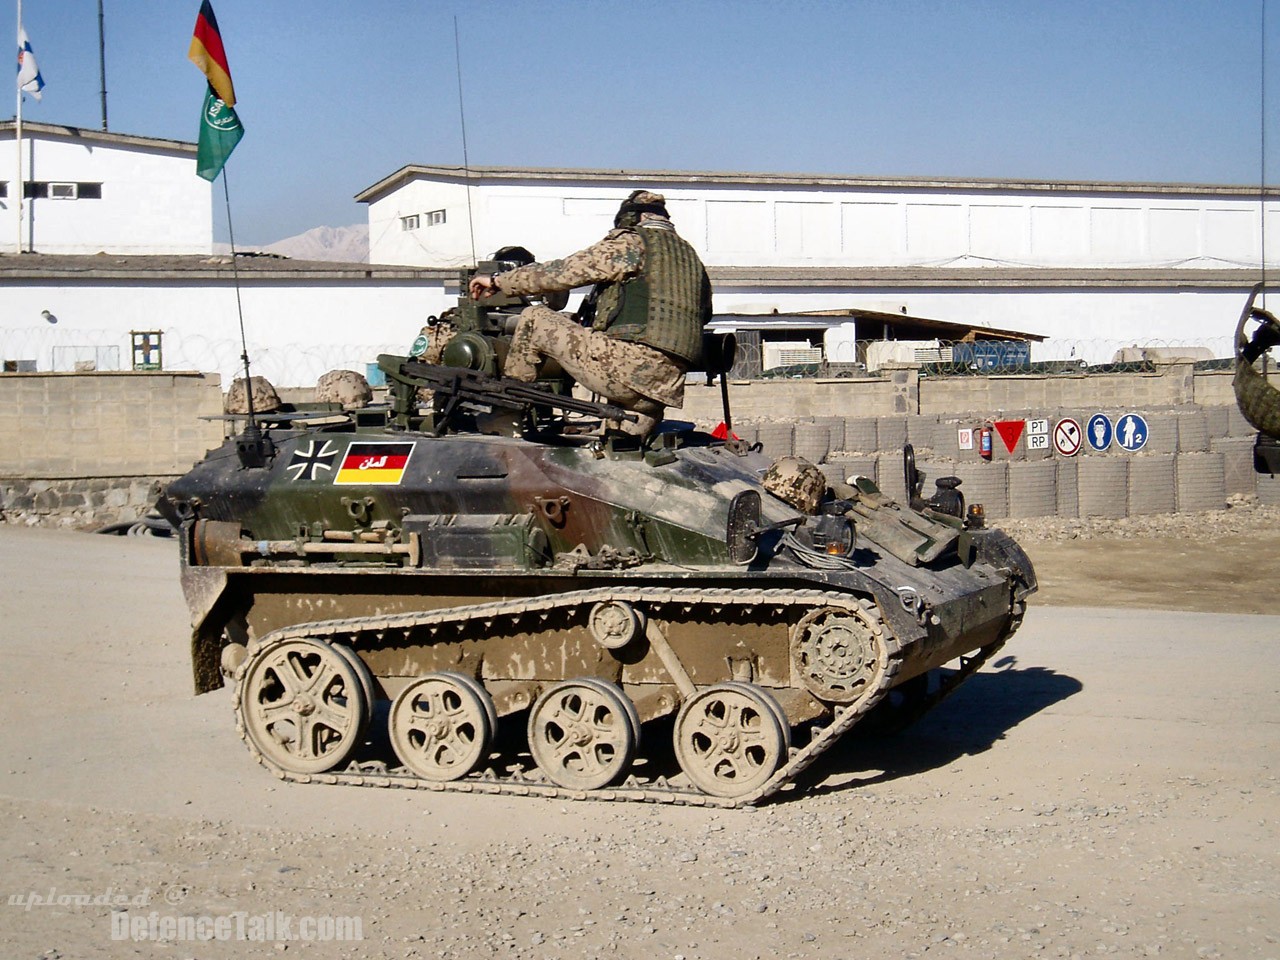 Wiesel armoured fighting vehicle - Germany Army